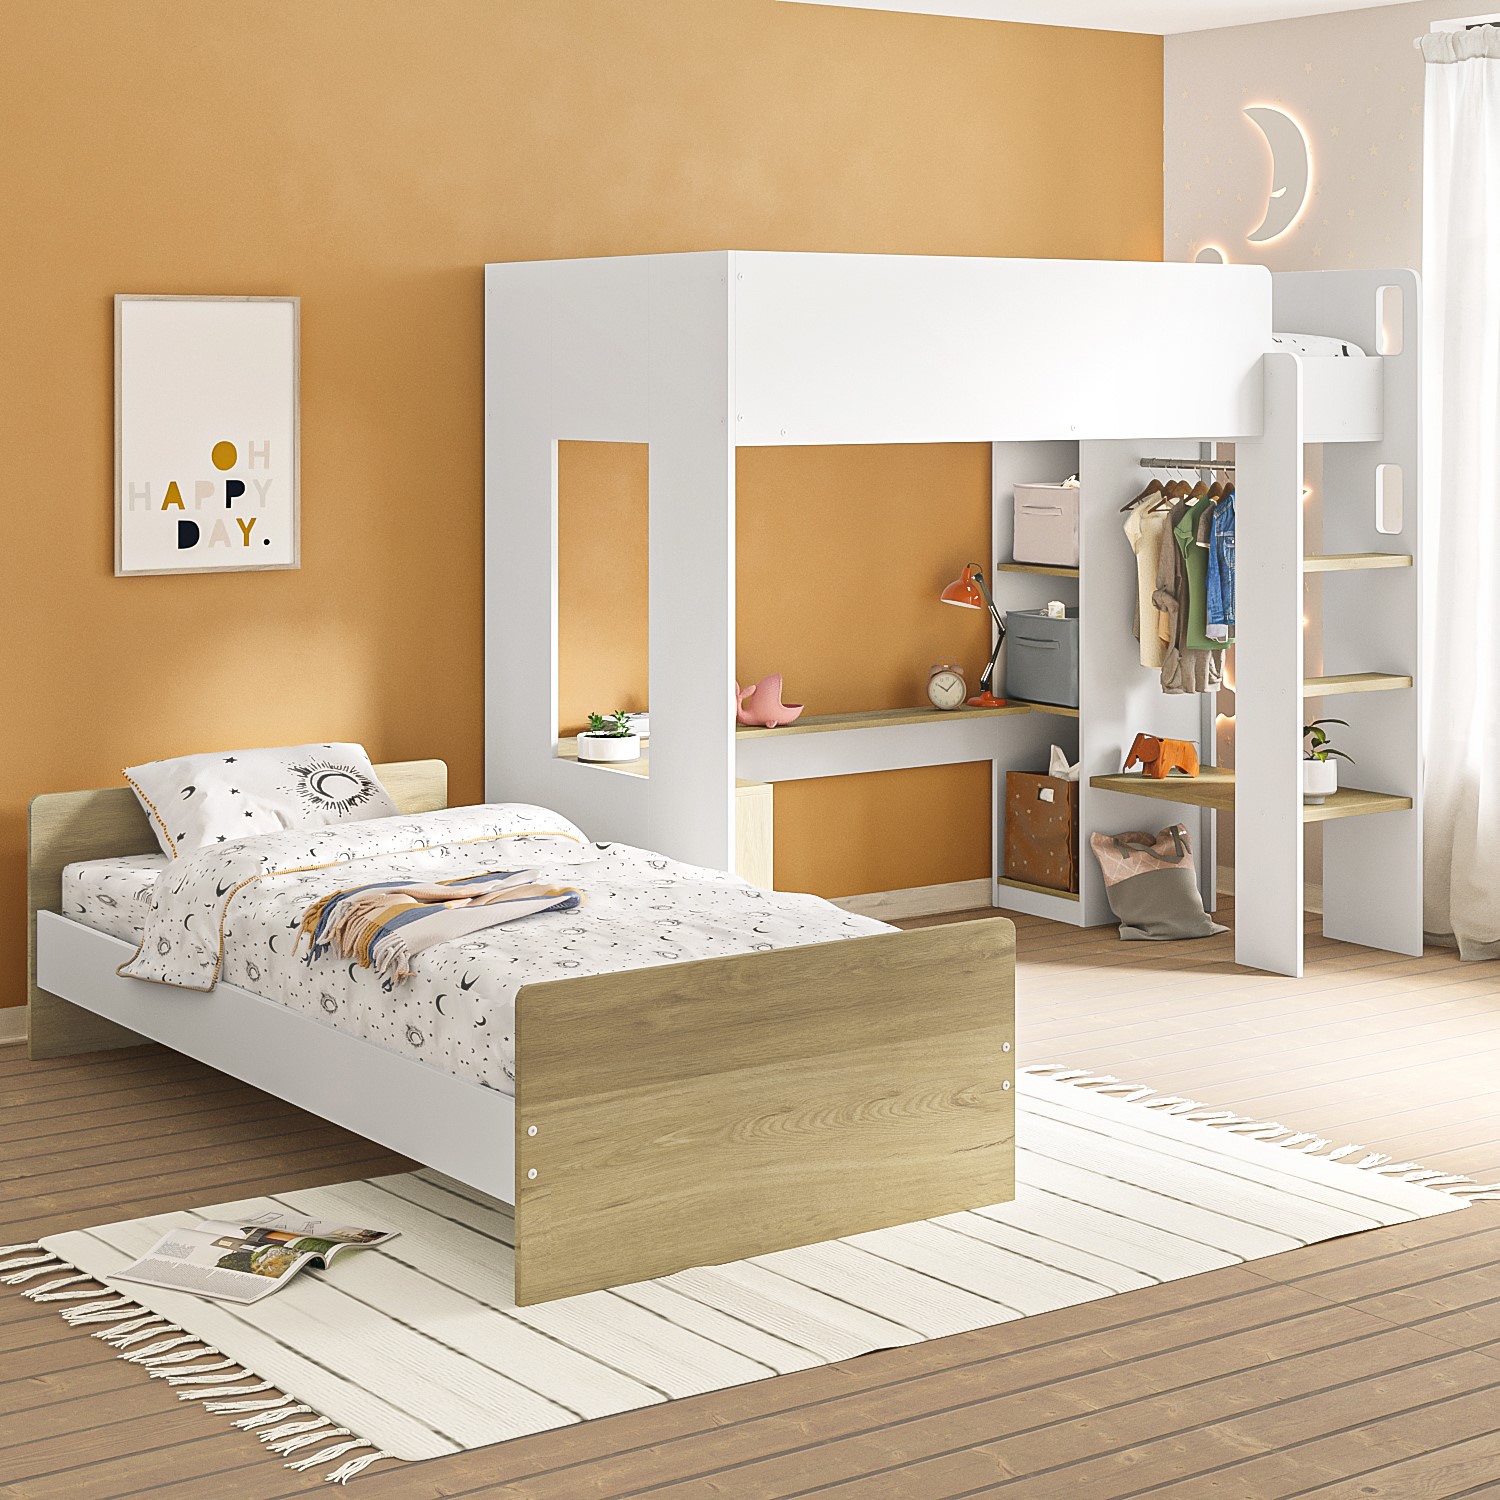 Read more about L-shaped detachable bunk bed with storage in white and oak layne